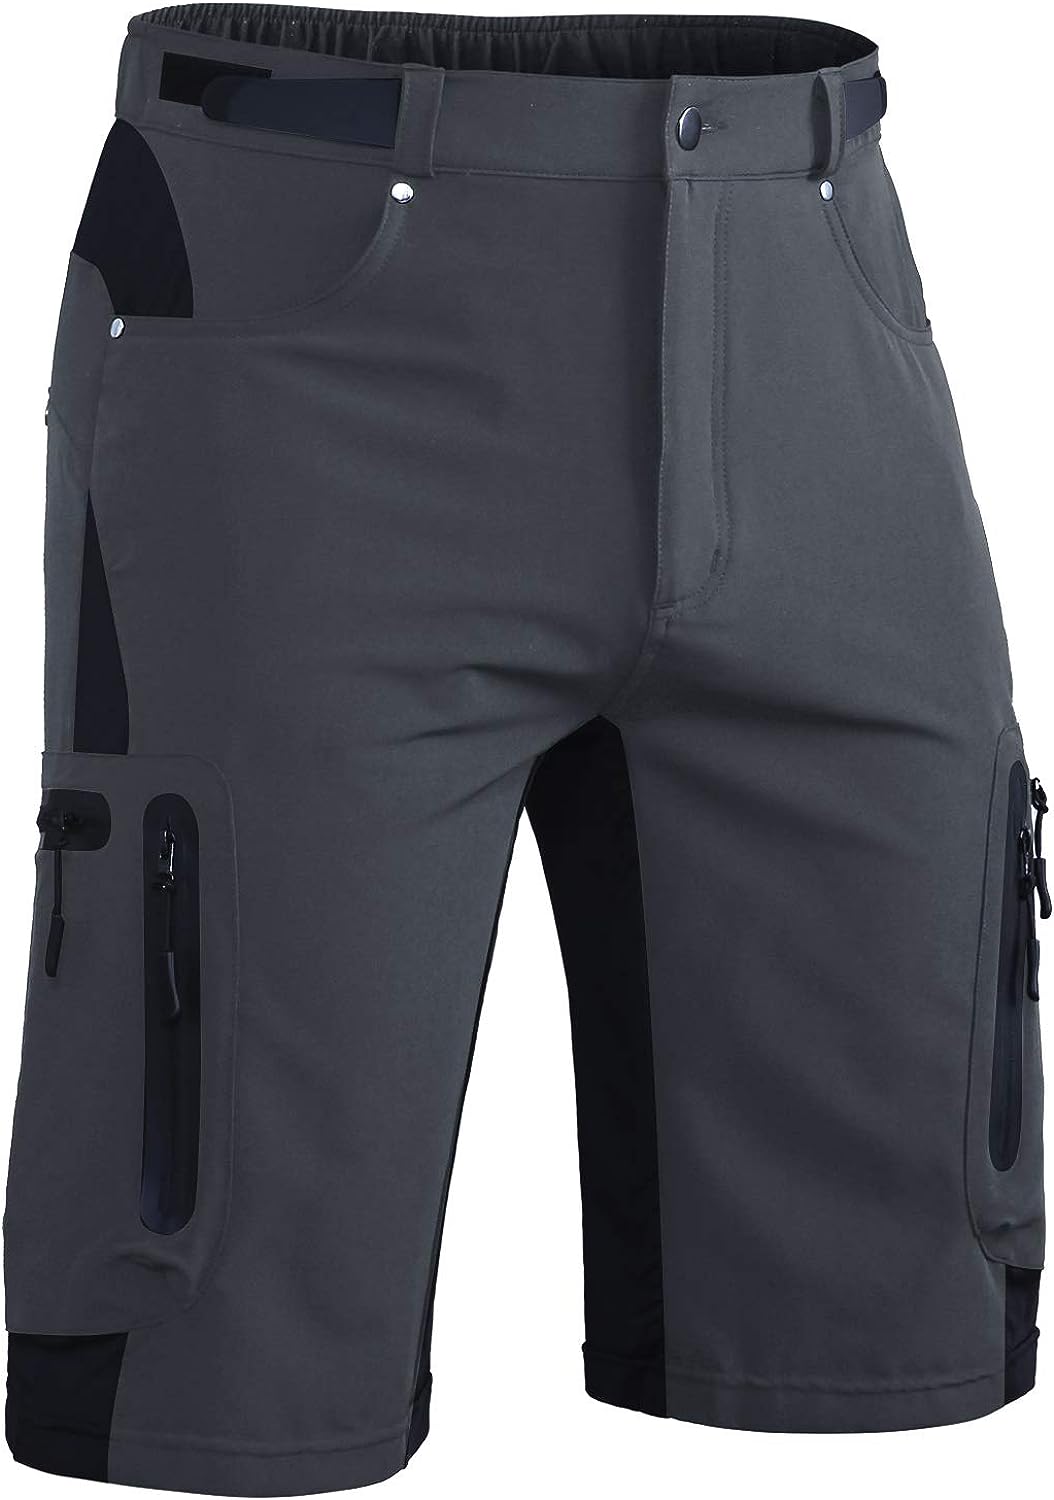 Men's Hiking Cargo Shorts - Lightweight, Quick-Dry, Stretch MTB Shorts for  Golf, Fishing, Tactical, and Casual Outdoor Activities